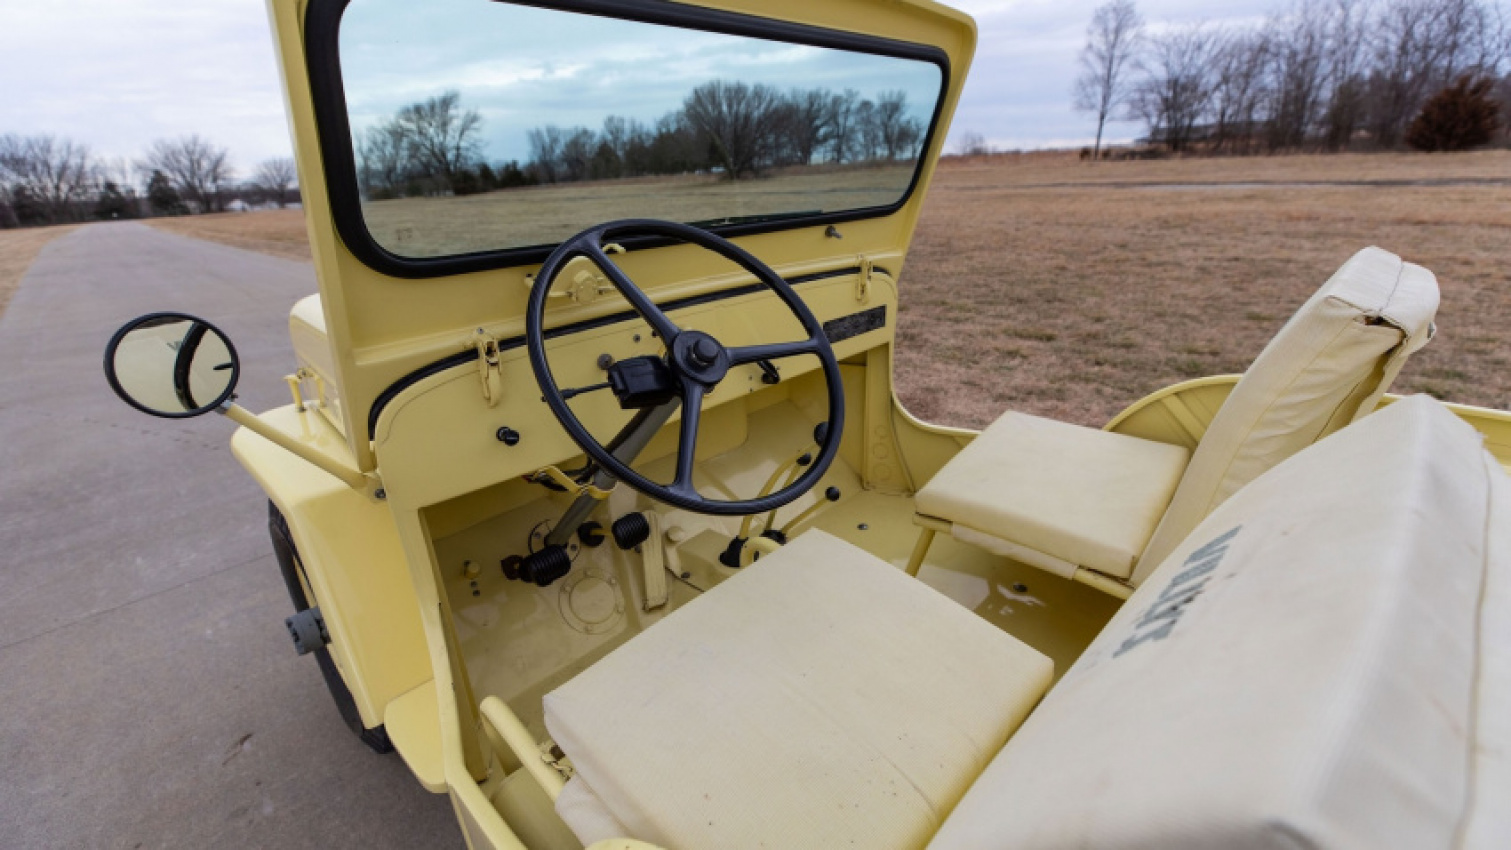 autos, cars, jeep, news, vnex, trip over this utterly charming 1954 willys jeep that's banana yellow